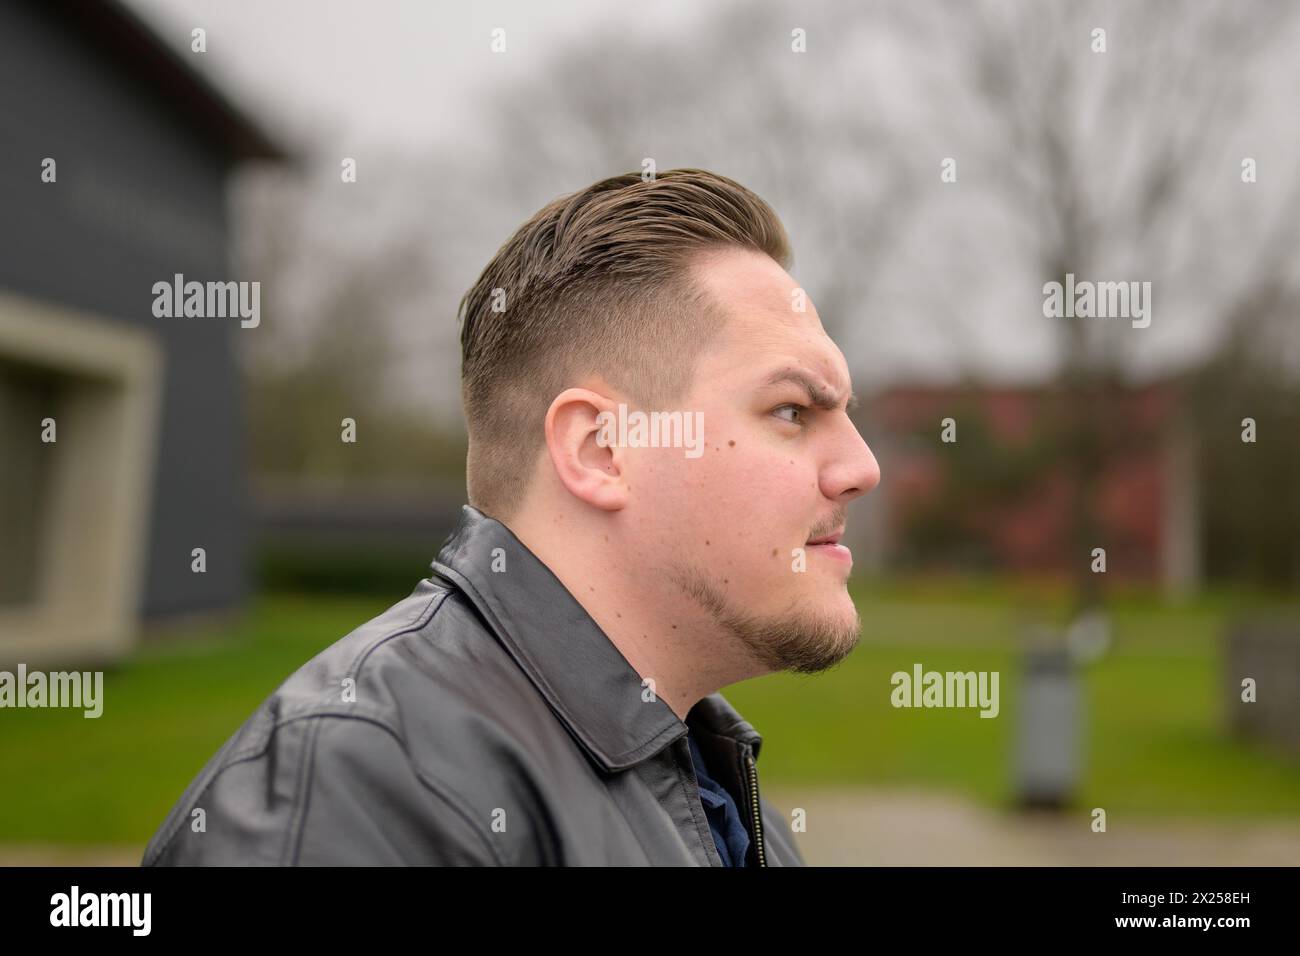 Side view of a young attractive man in his twenties looking to side with an angry emotion Stock Photo